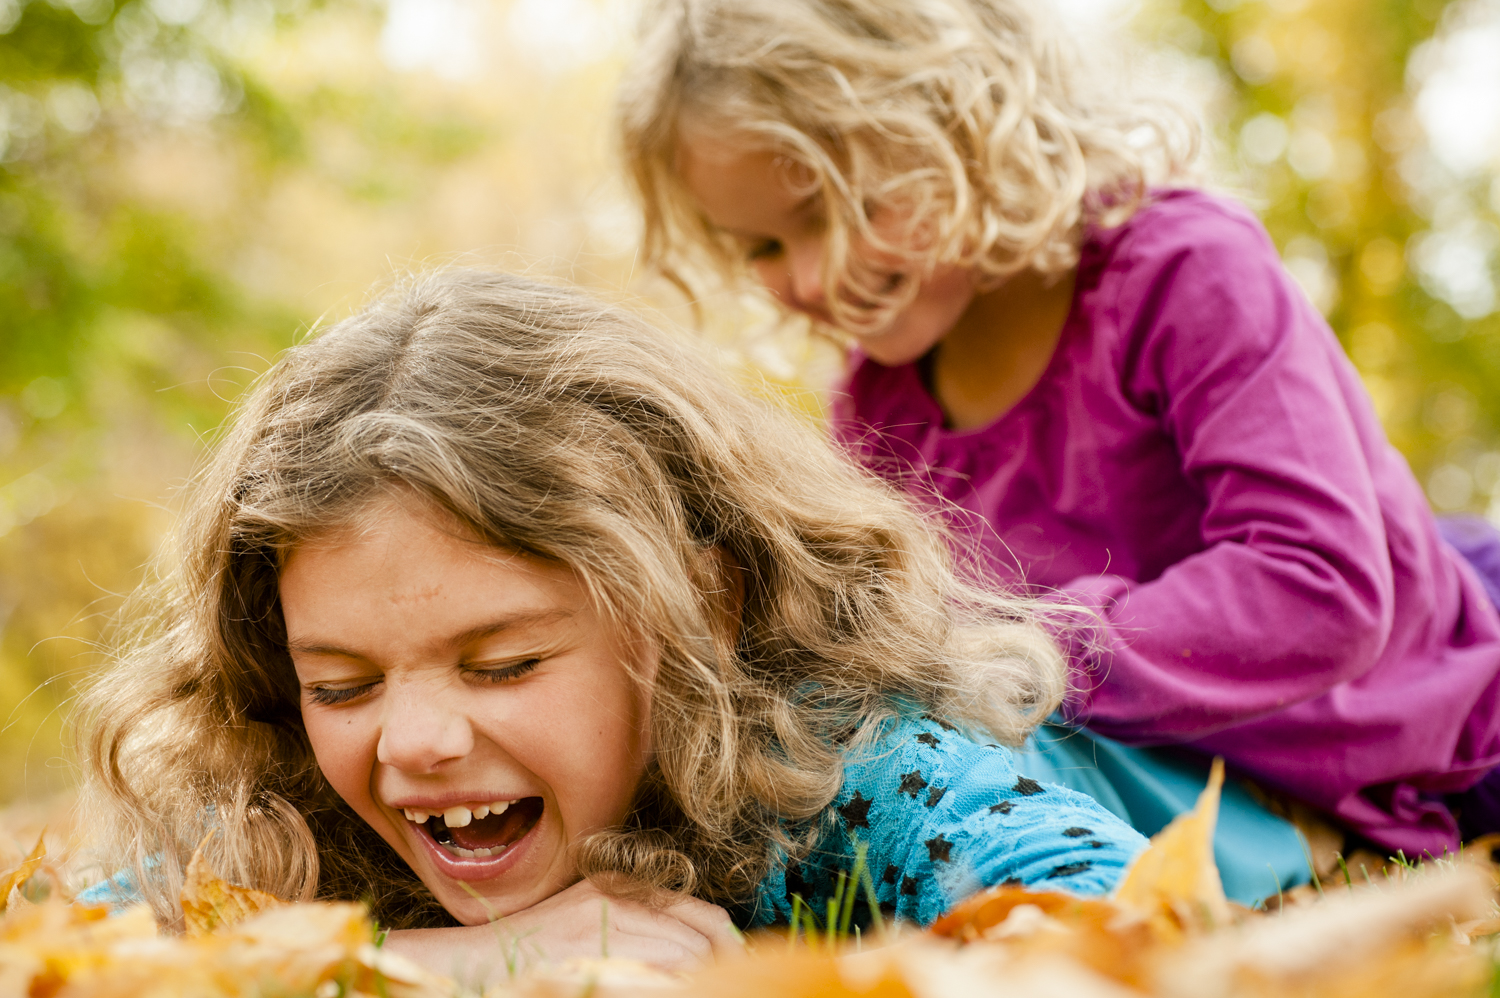 fall_lifestyle_family_leaves_candid_playing-019.jpg